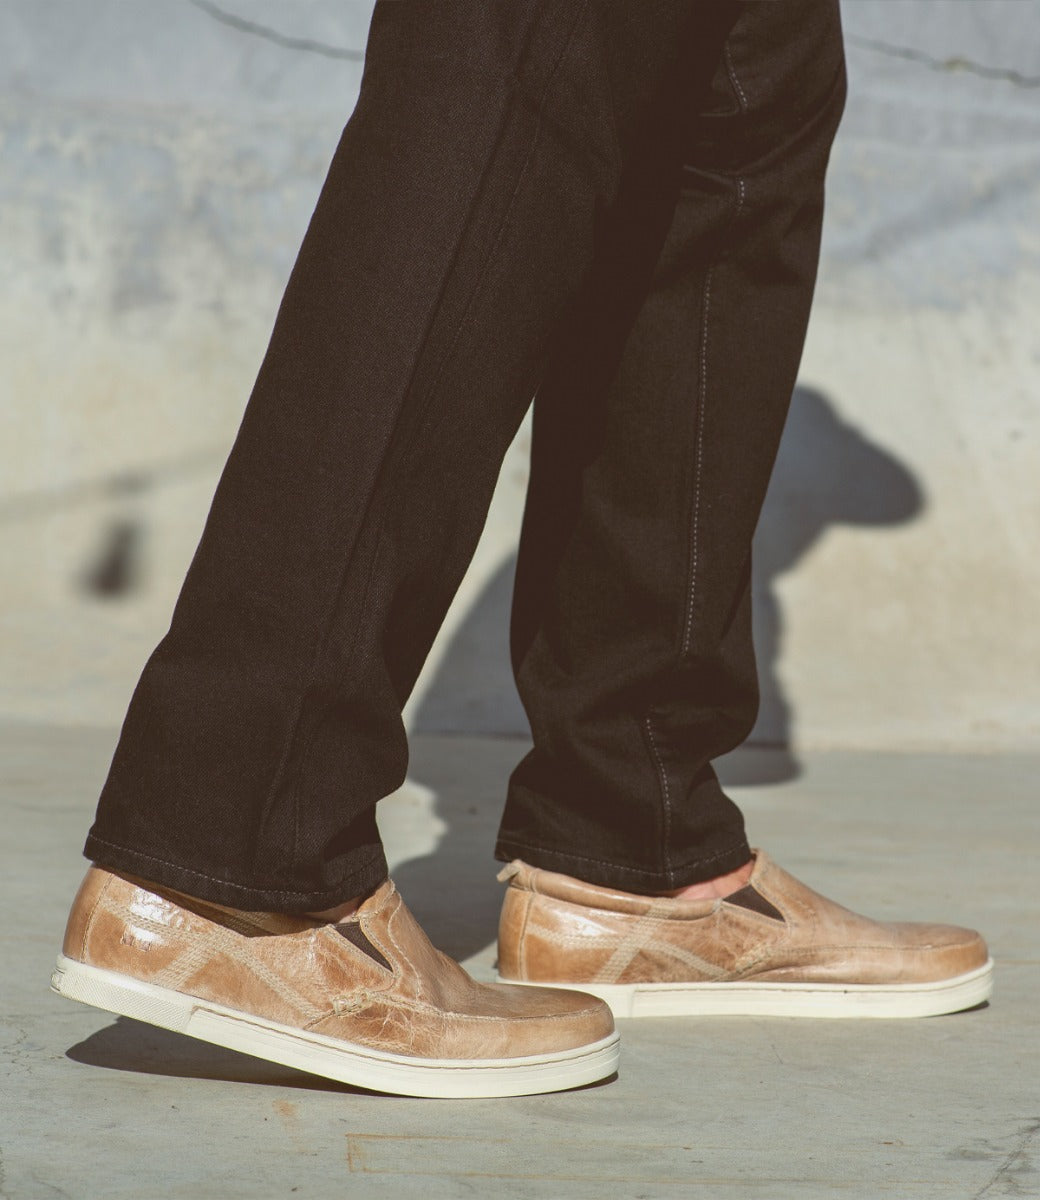 A person wearing a pair of Bed Stu Carp tan slip-on shoes.